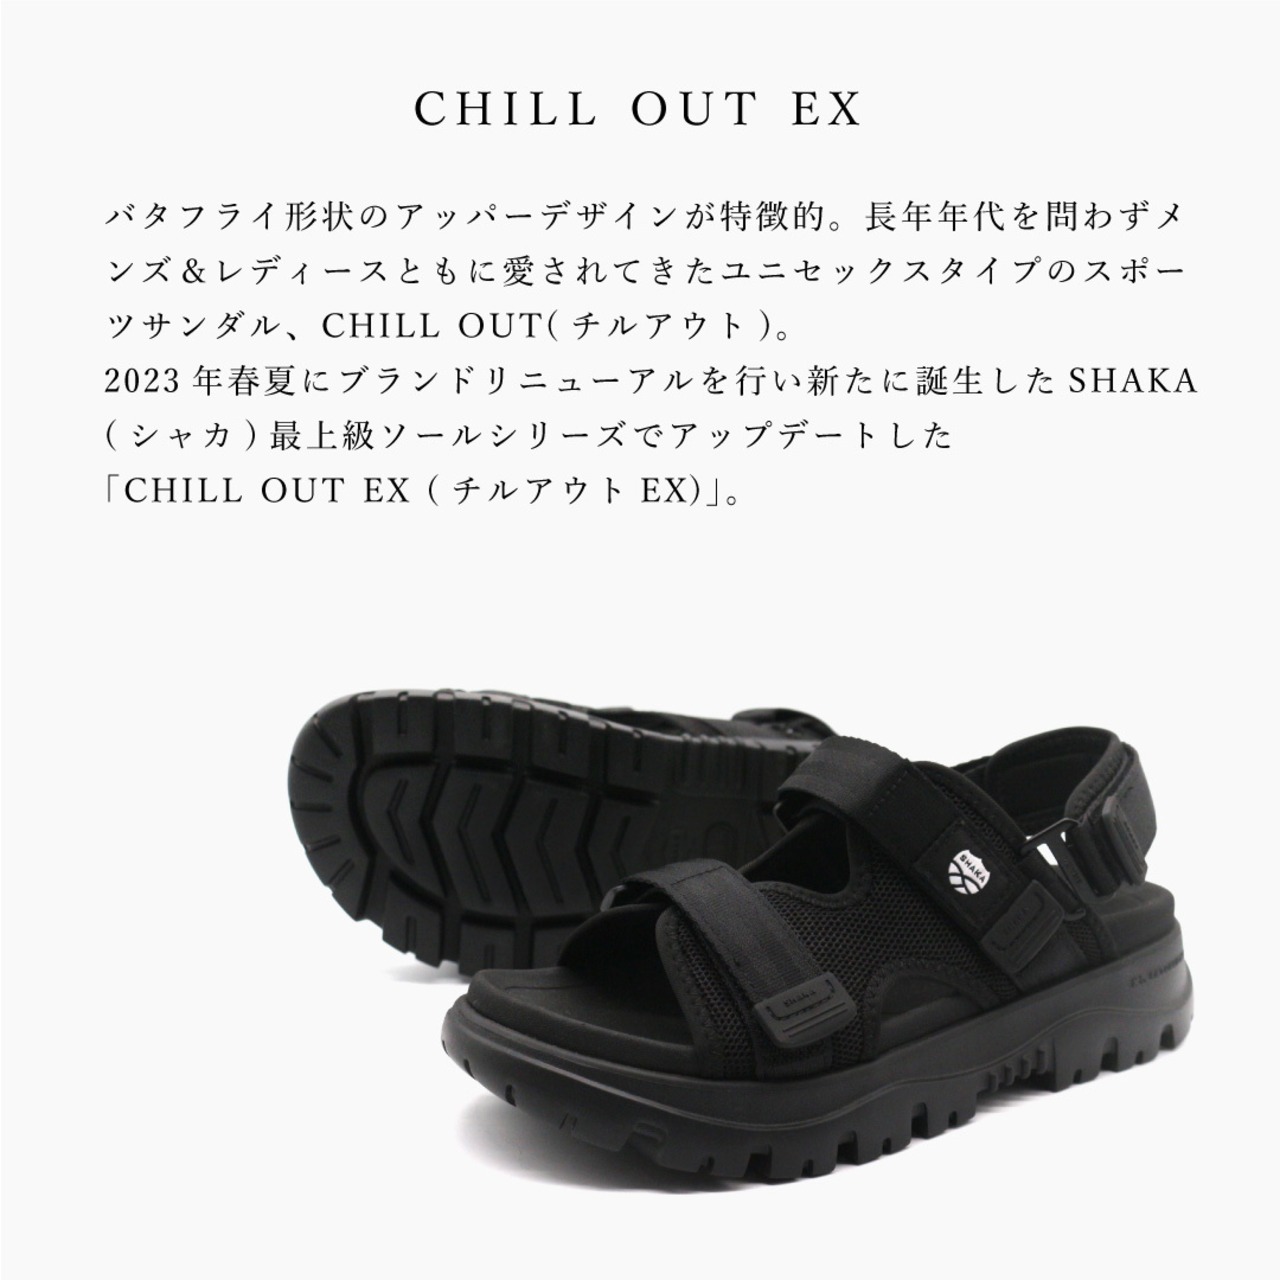 SHAKA CHILL OUT EX SK-239 BLACK